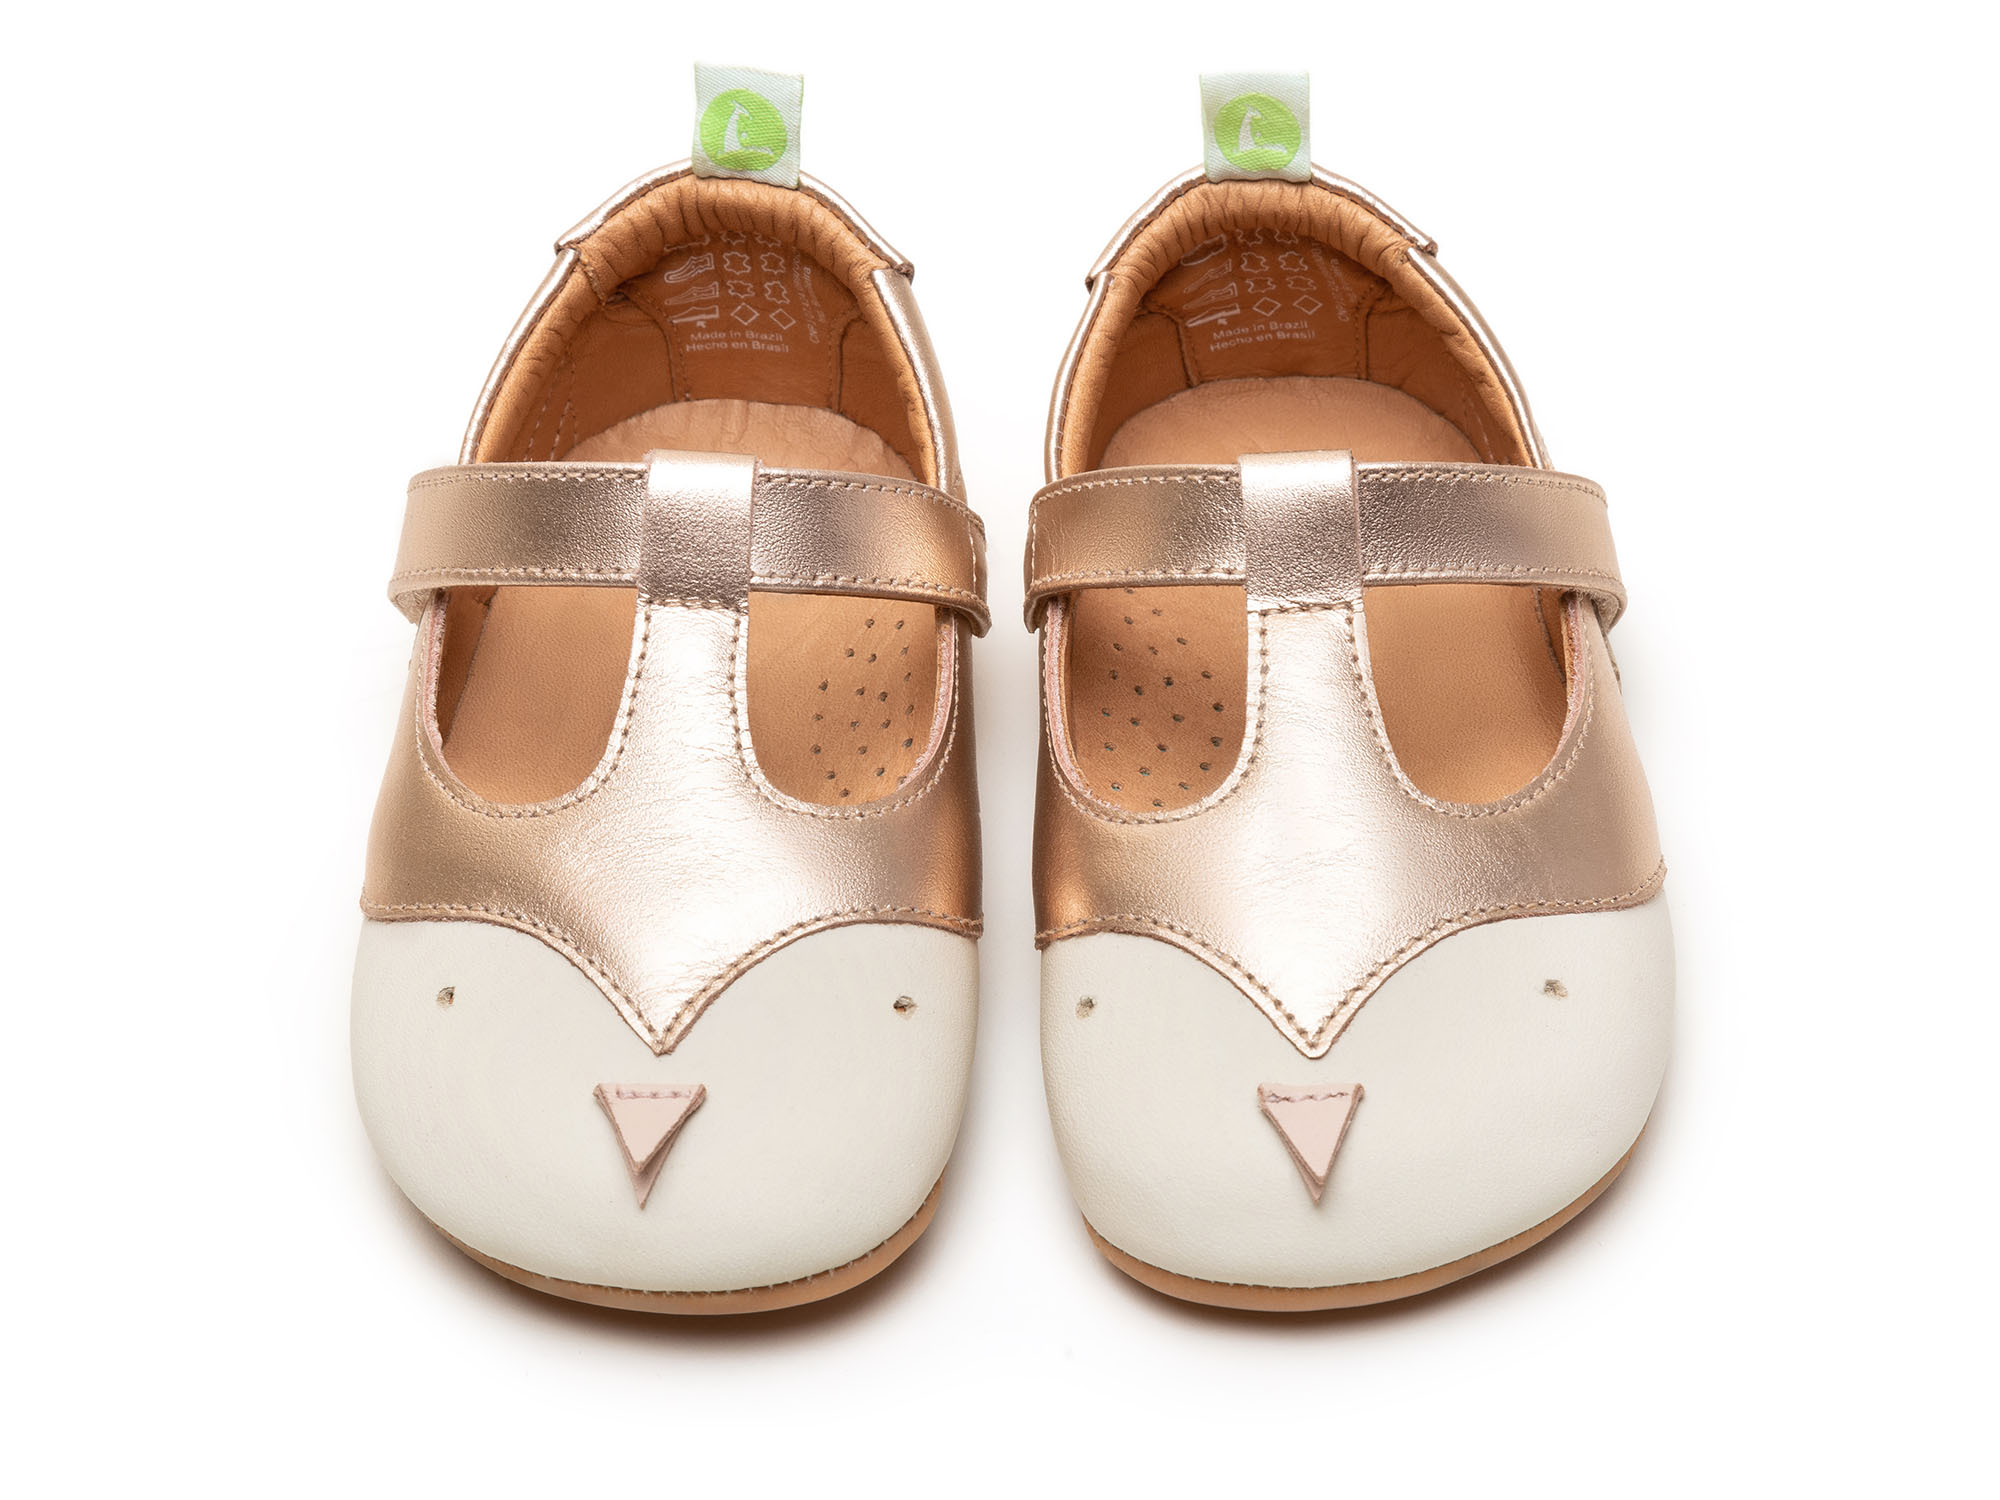 UP & GO Mary Janes for Girls Chirpy | Tip Toey Joey - Australia - 1